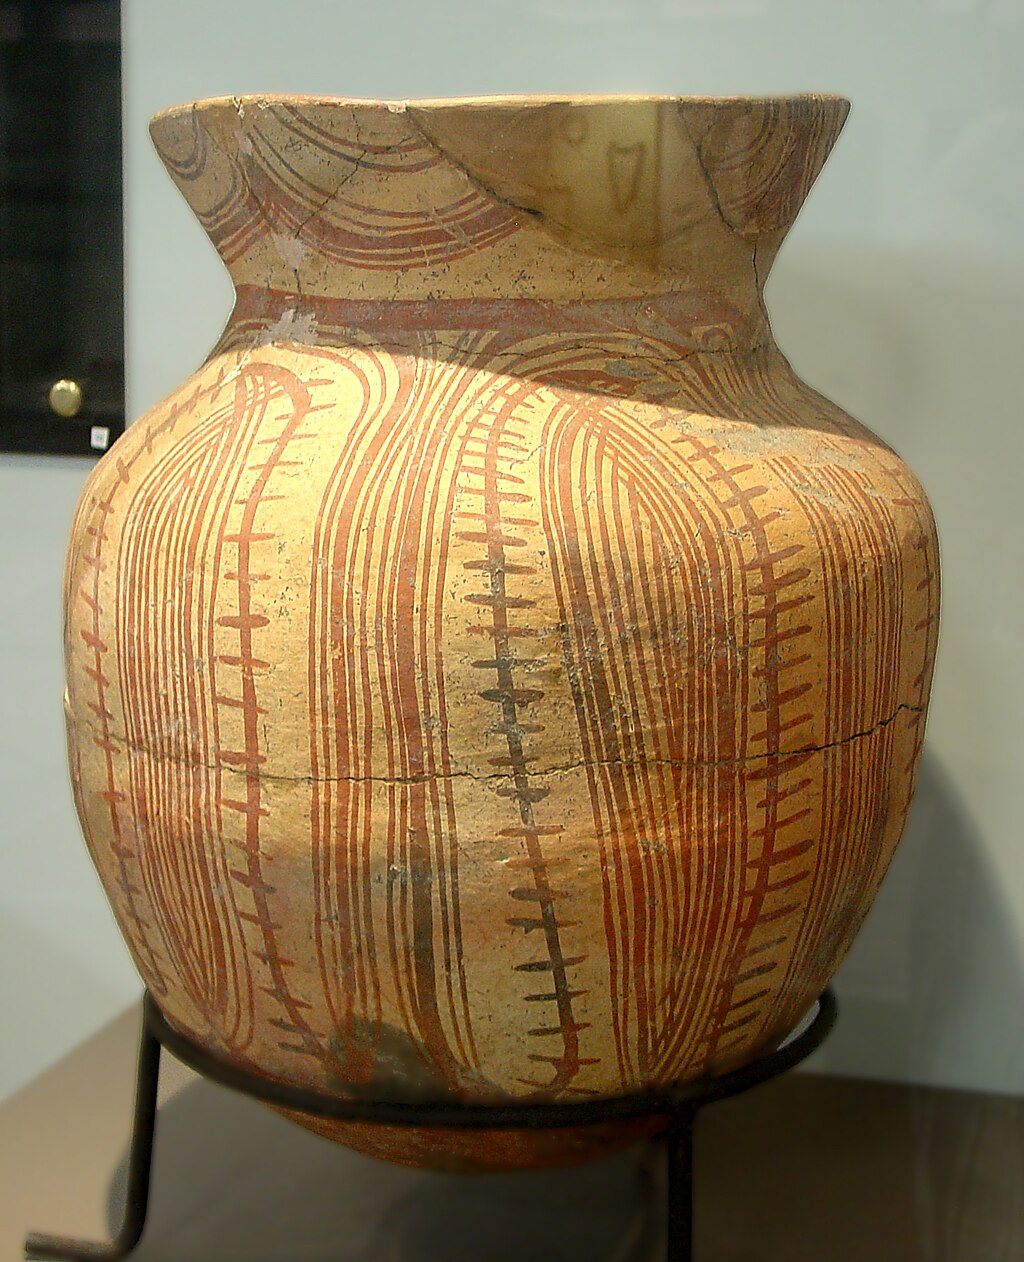 Neolithic Pottery from Ban Chiang